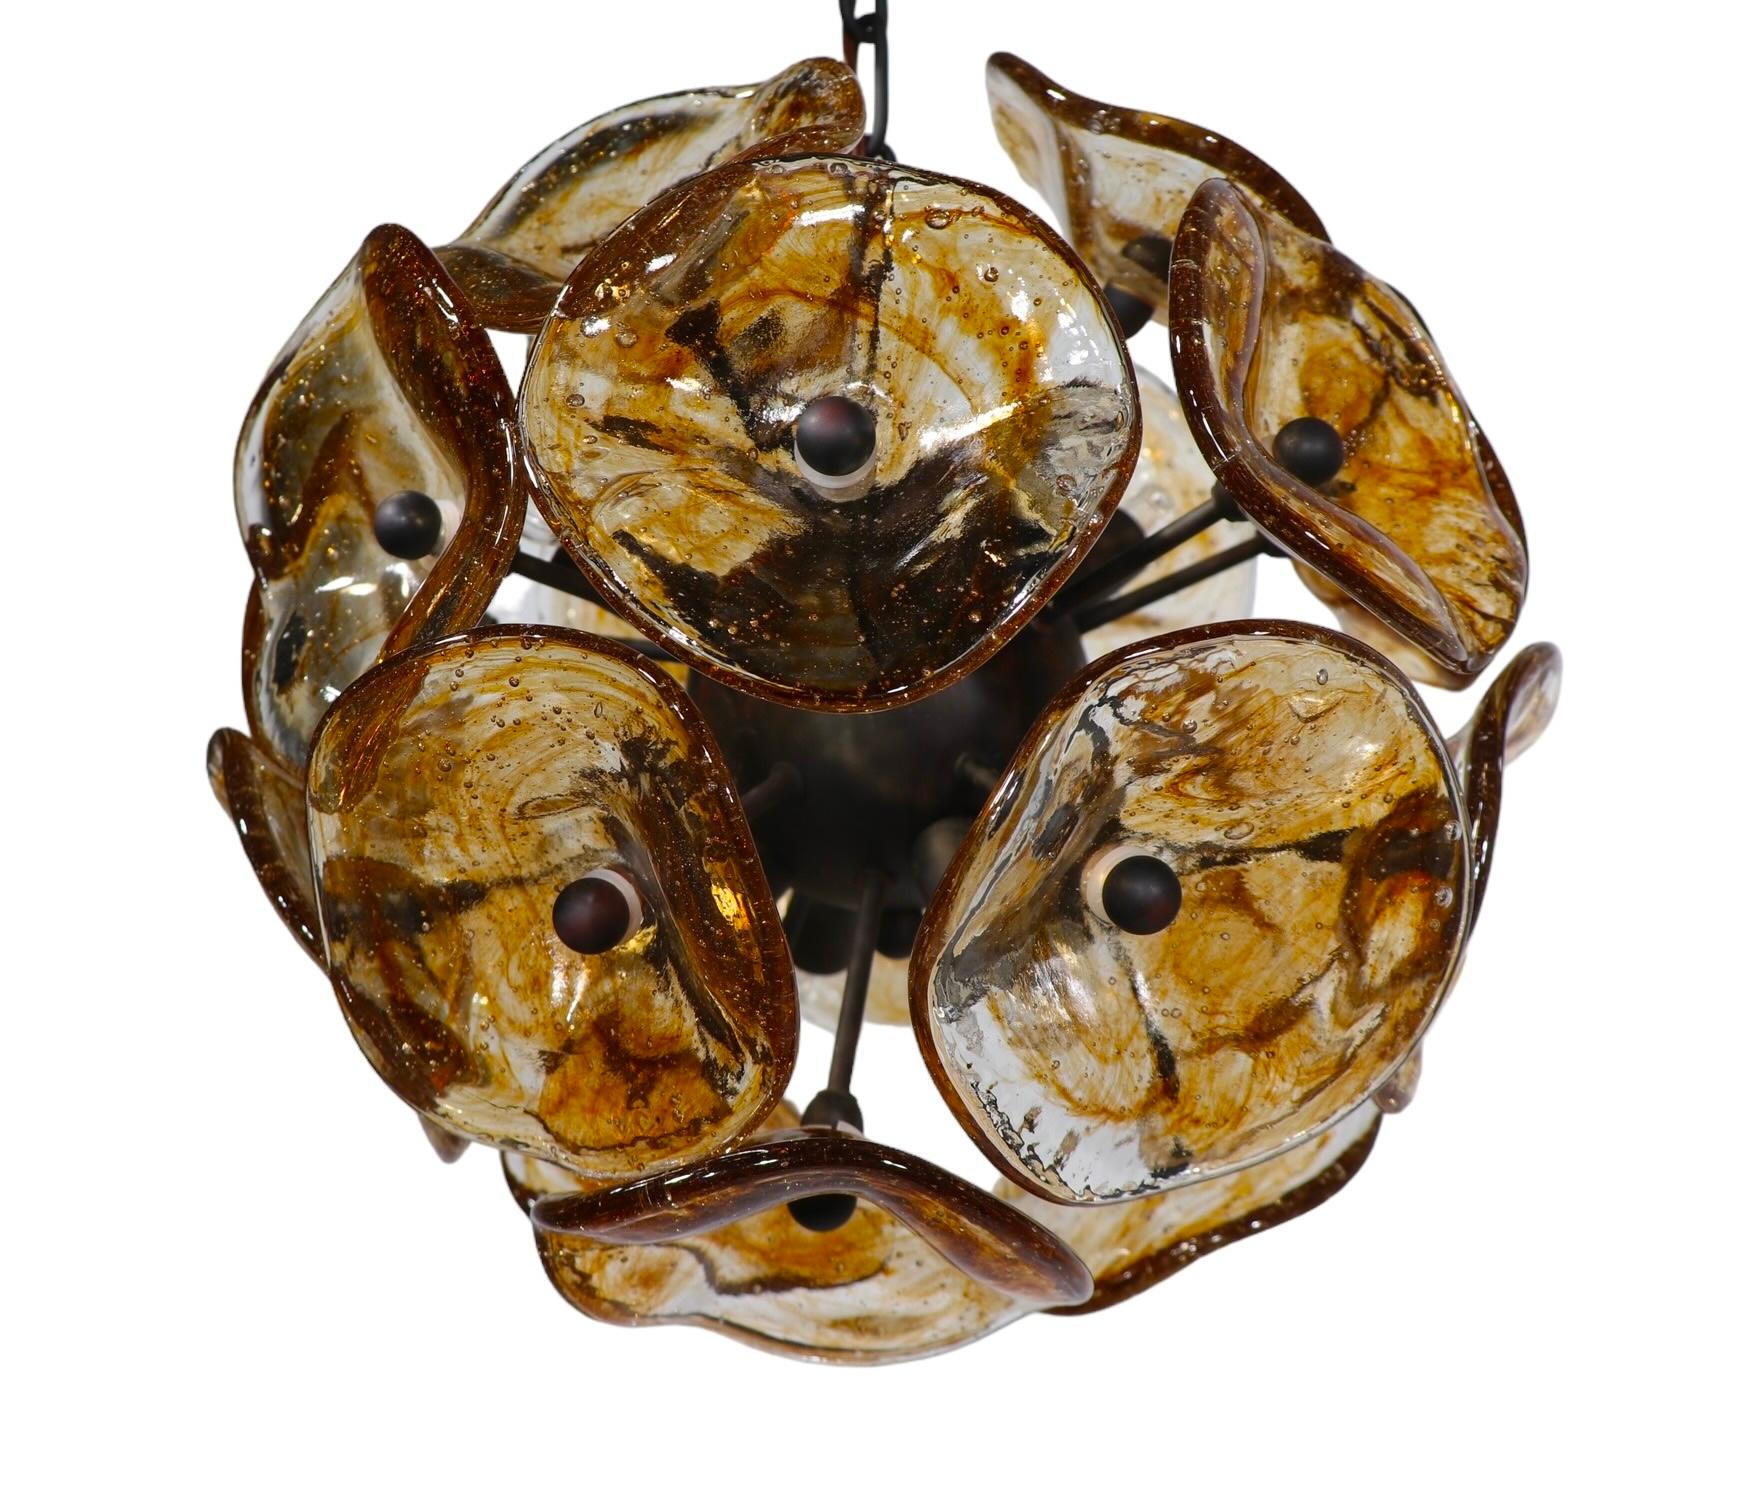 Mid-Century Modern Post Modern Chandelier with Murano Glass Flowers by Fiori c 1990 -2010 For Sale